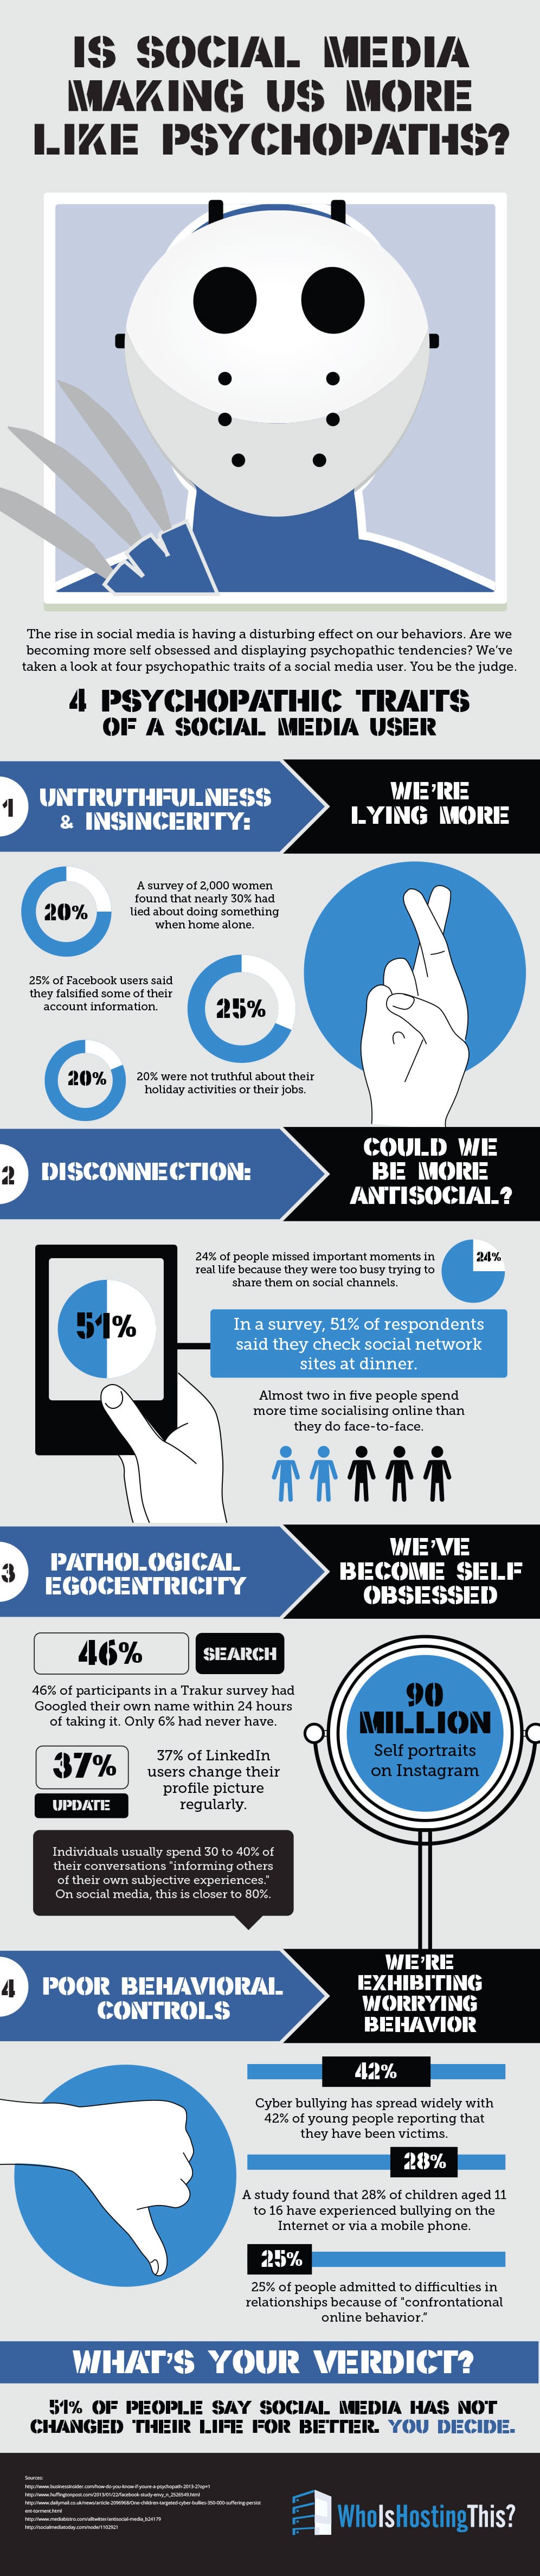 social-media-addicts-psychopaths-infographic